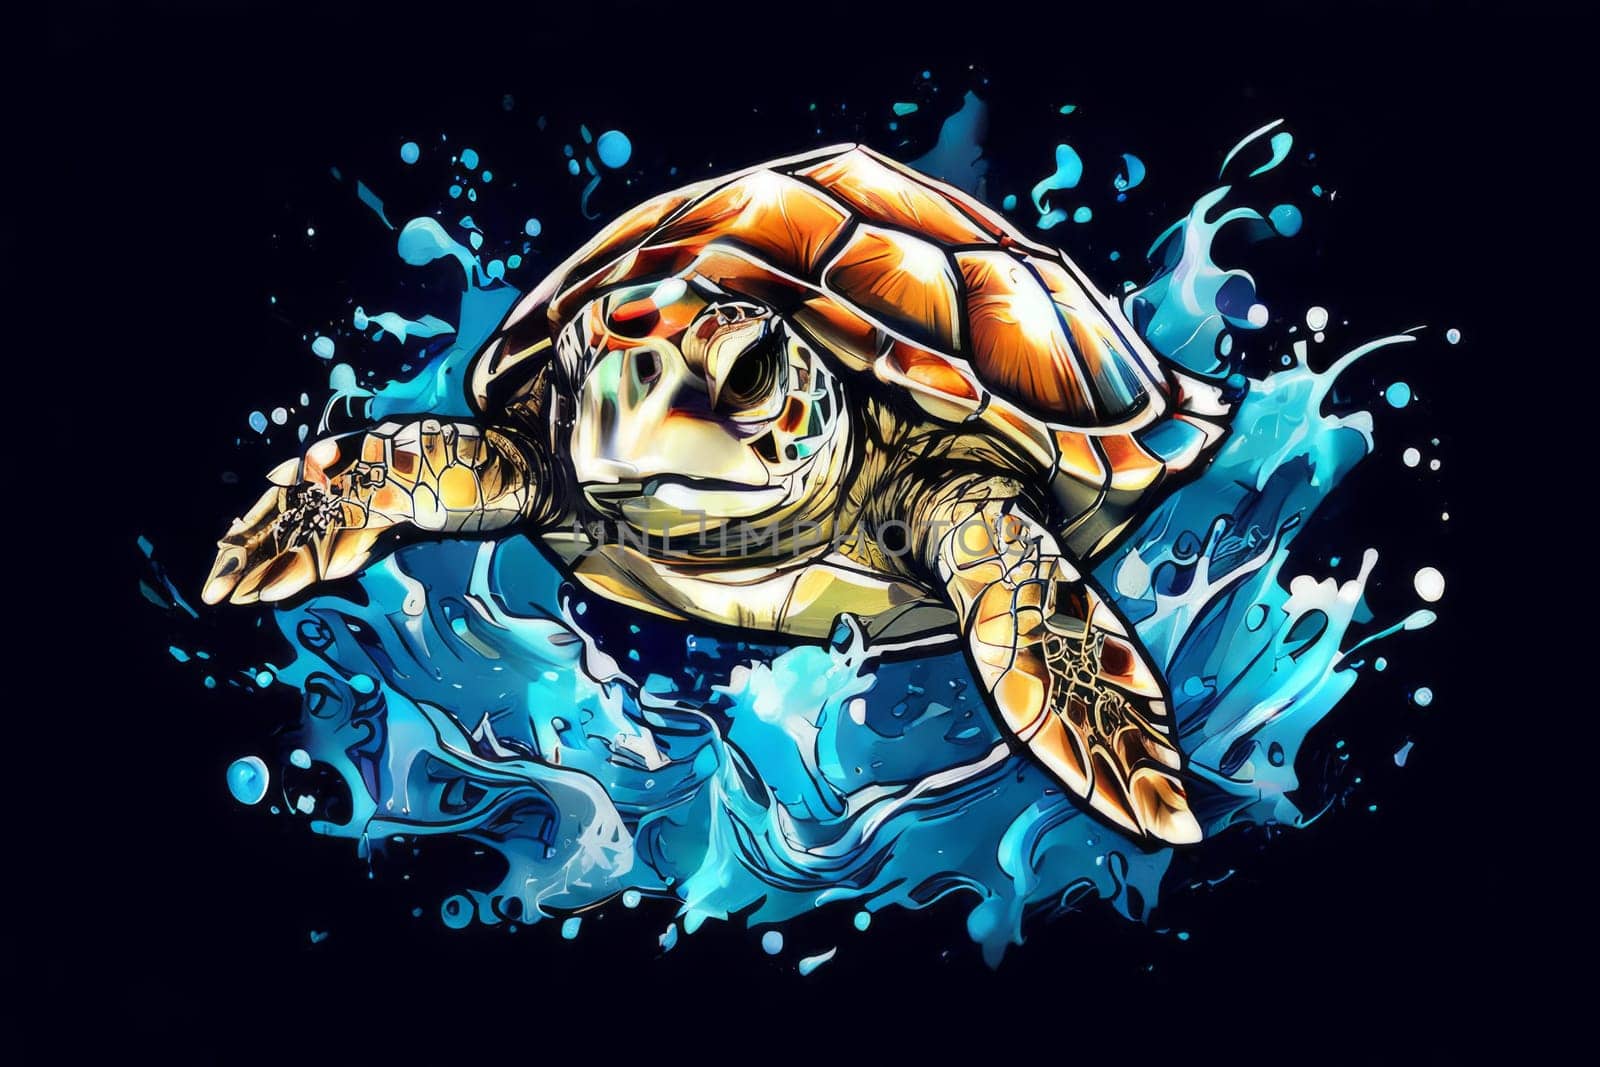 Exquisite image showcasing serene turtle gliding through crystal-clear blue waters of ocean. For fashion, clothing design, animal themed clothing advertising, Tshirt design